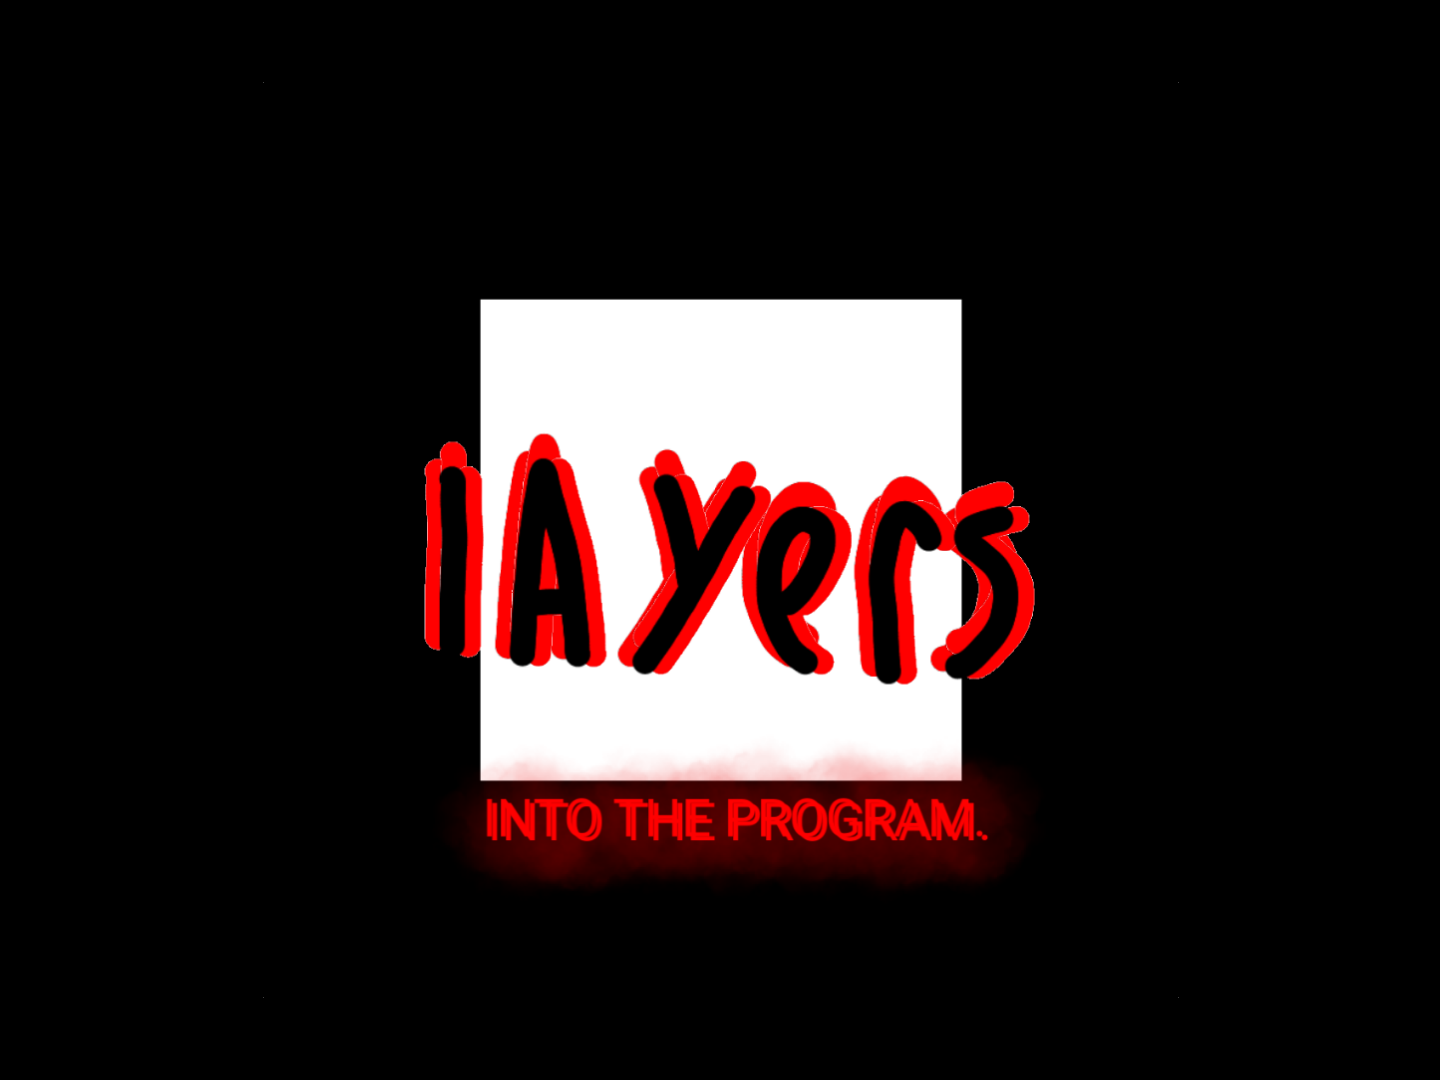 LAYERS: into the program